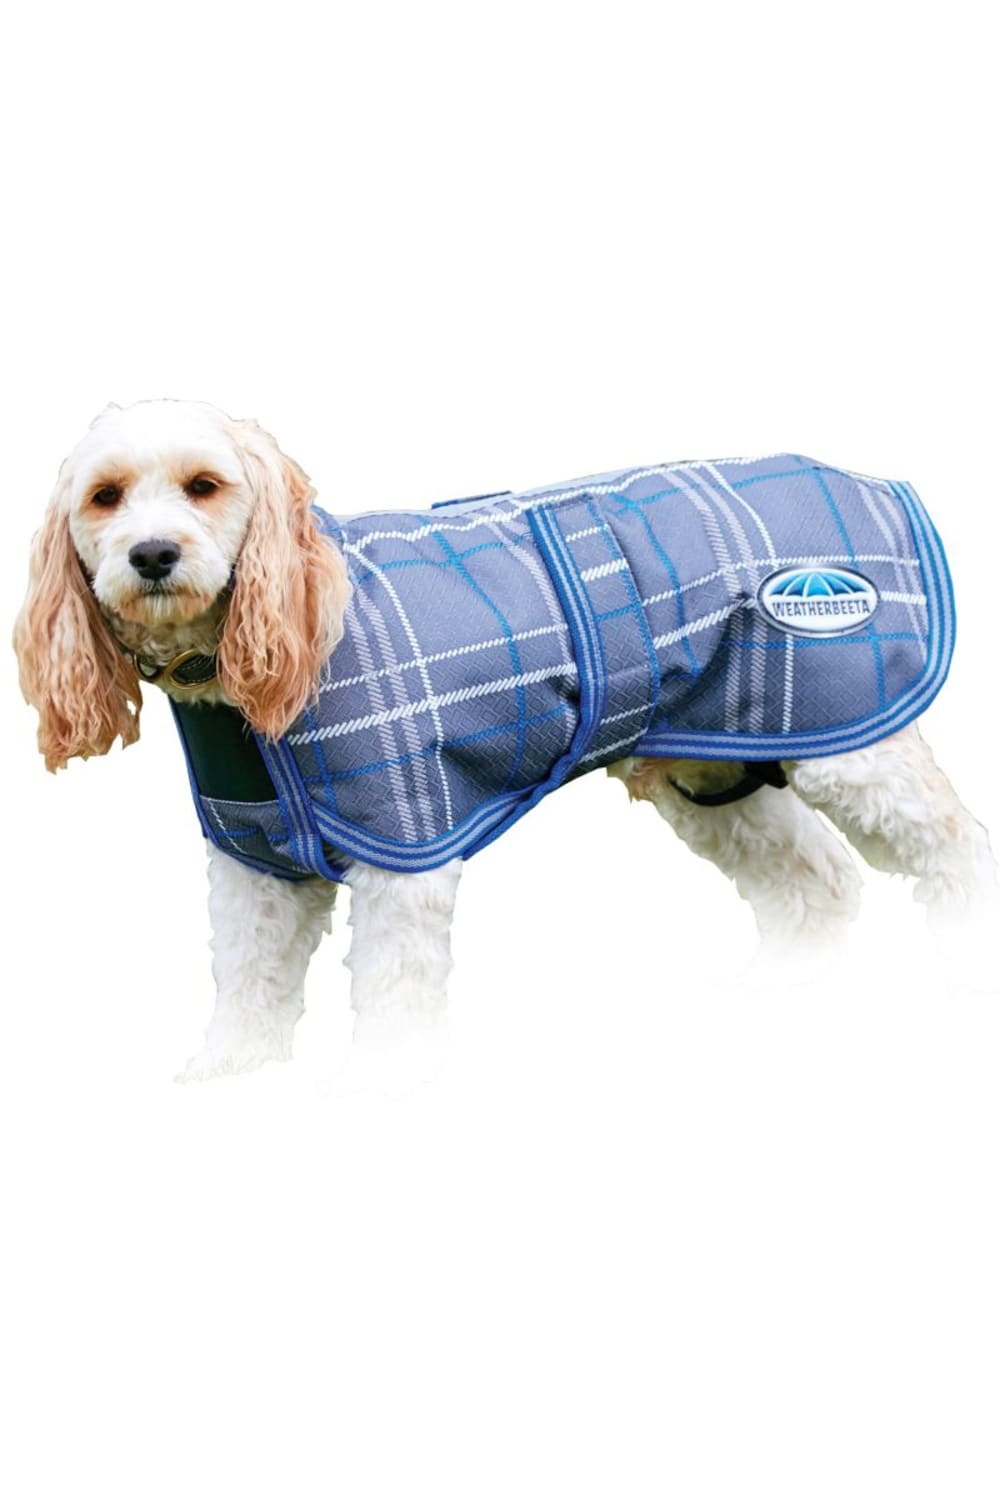 Weatherbeeta Parka 1200d Deluxe Dog Coat (Gray Plaid) (11.8 inches) (11.8 inches)